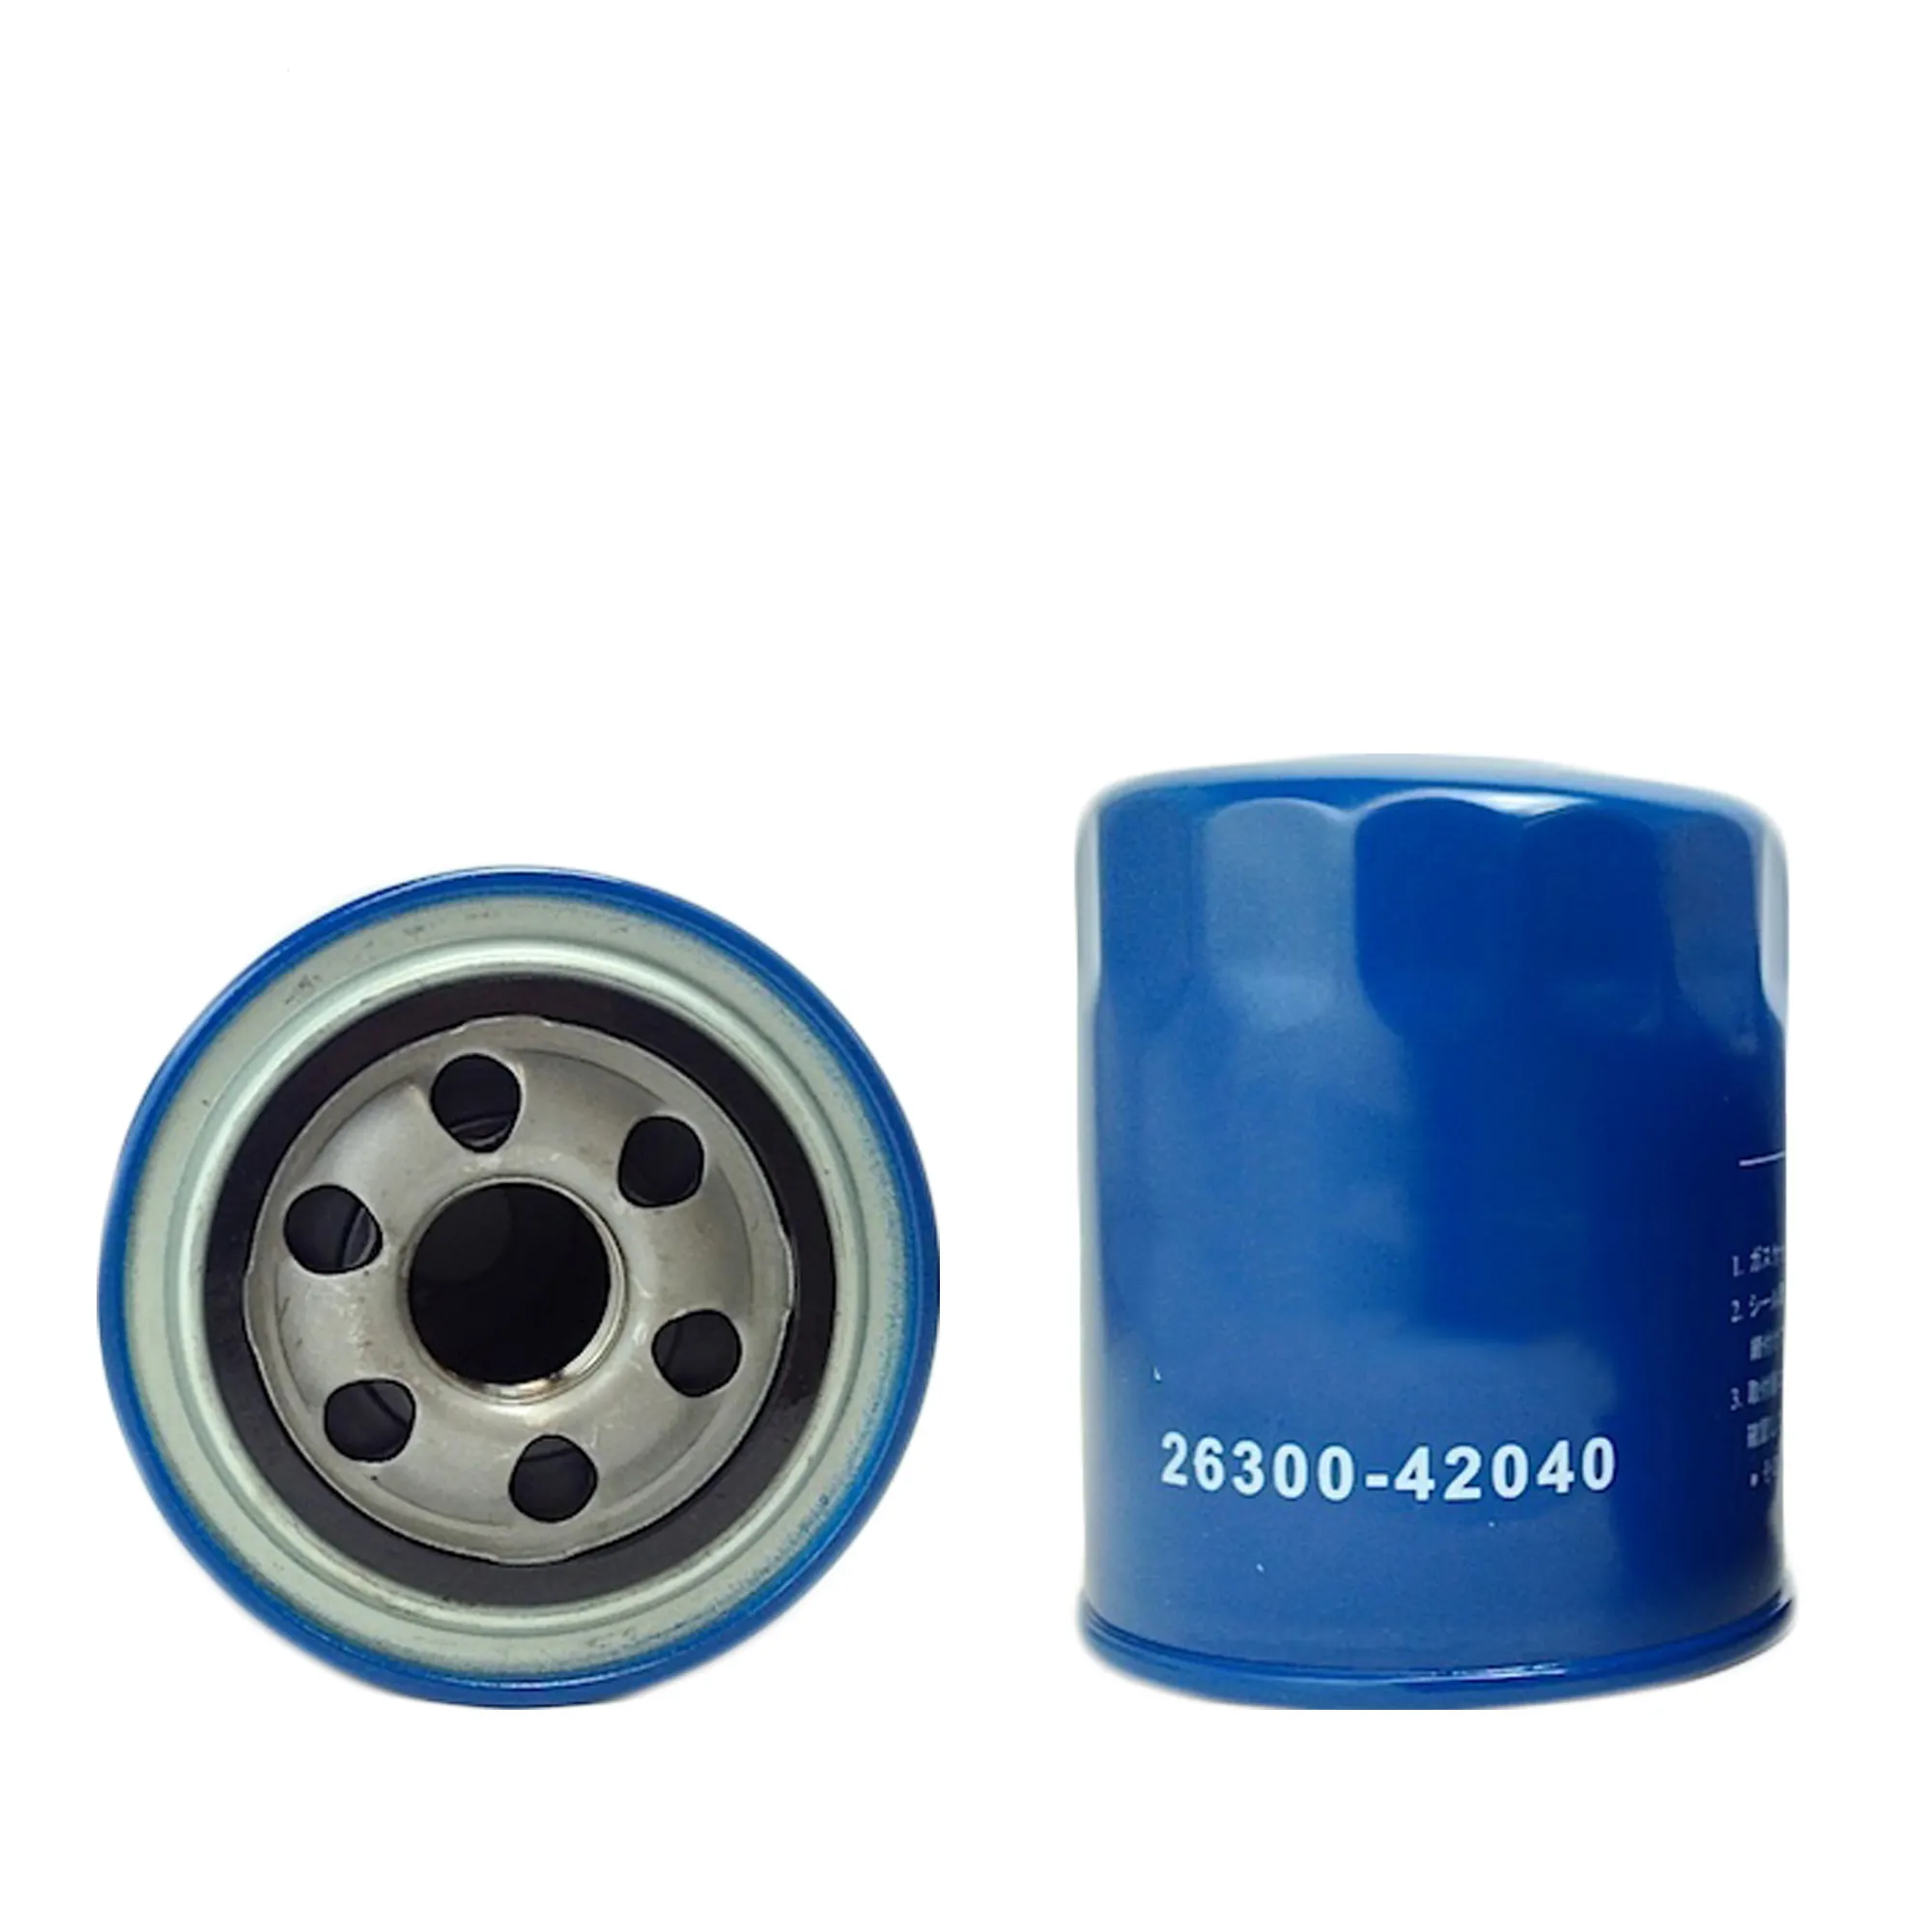 Auto parts manufacturer good quality oil filter for Hyundai 26300-42020 26300-42000 26300-42010 MD110920 MD069782 MD184086